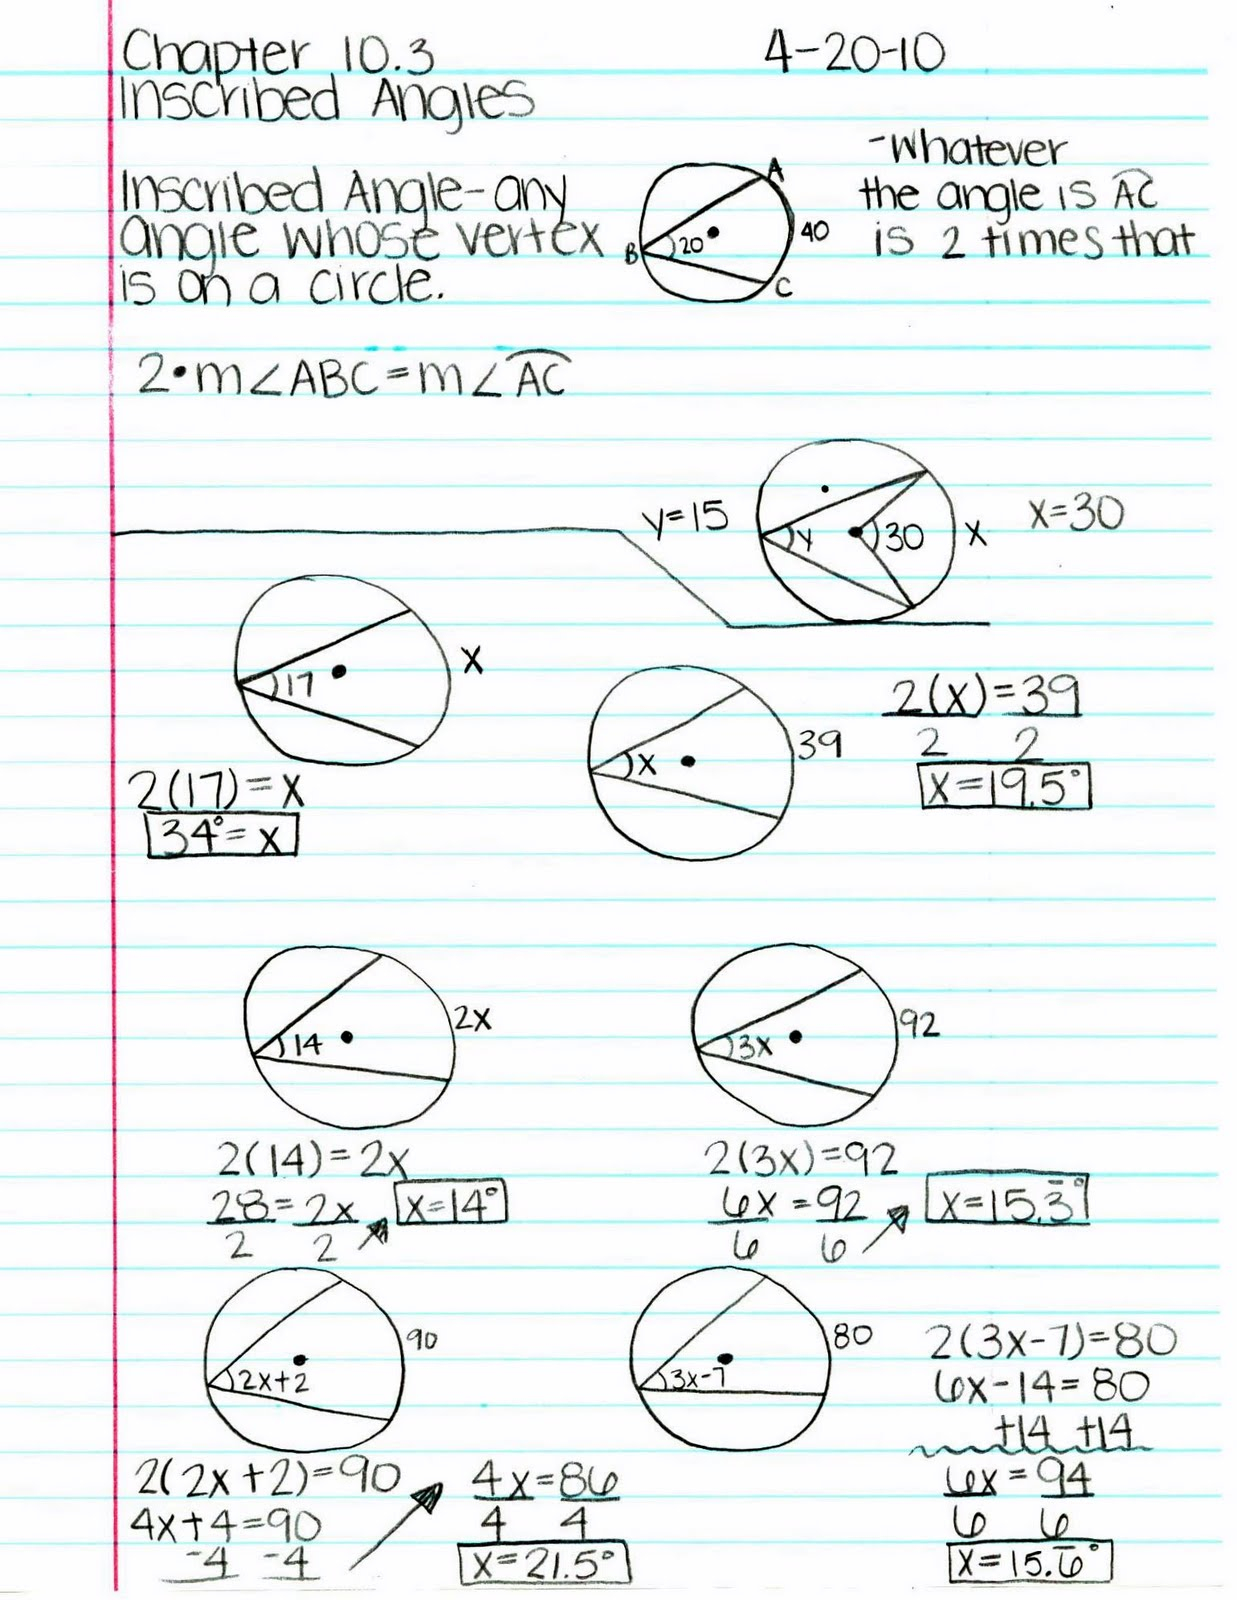 Inscribed Angles Worksheet Answers